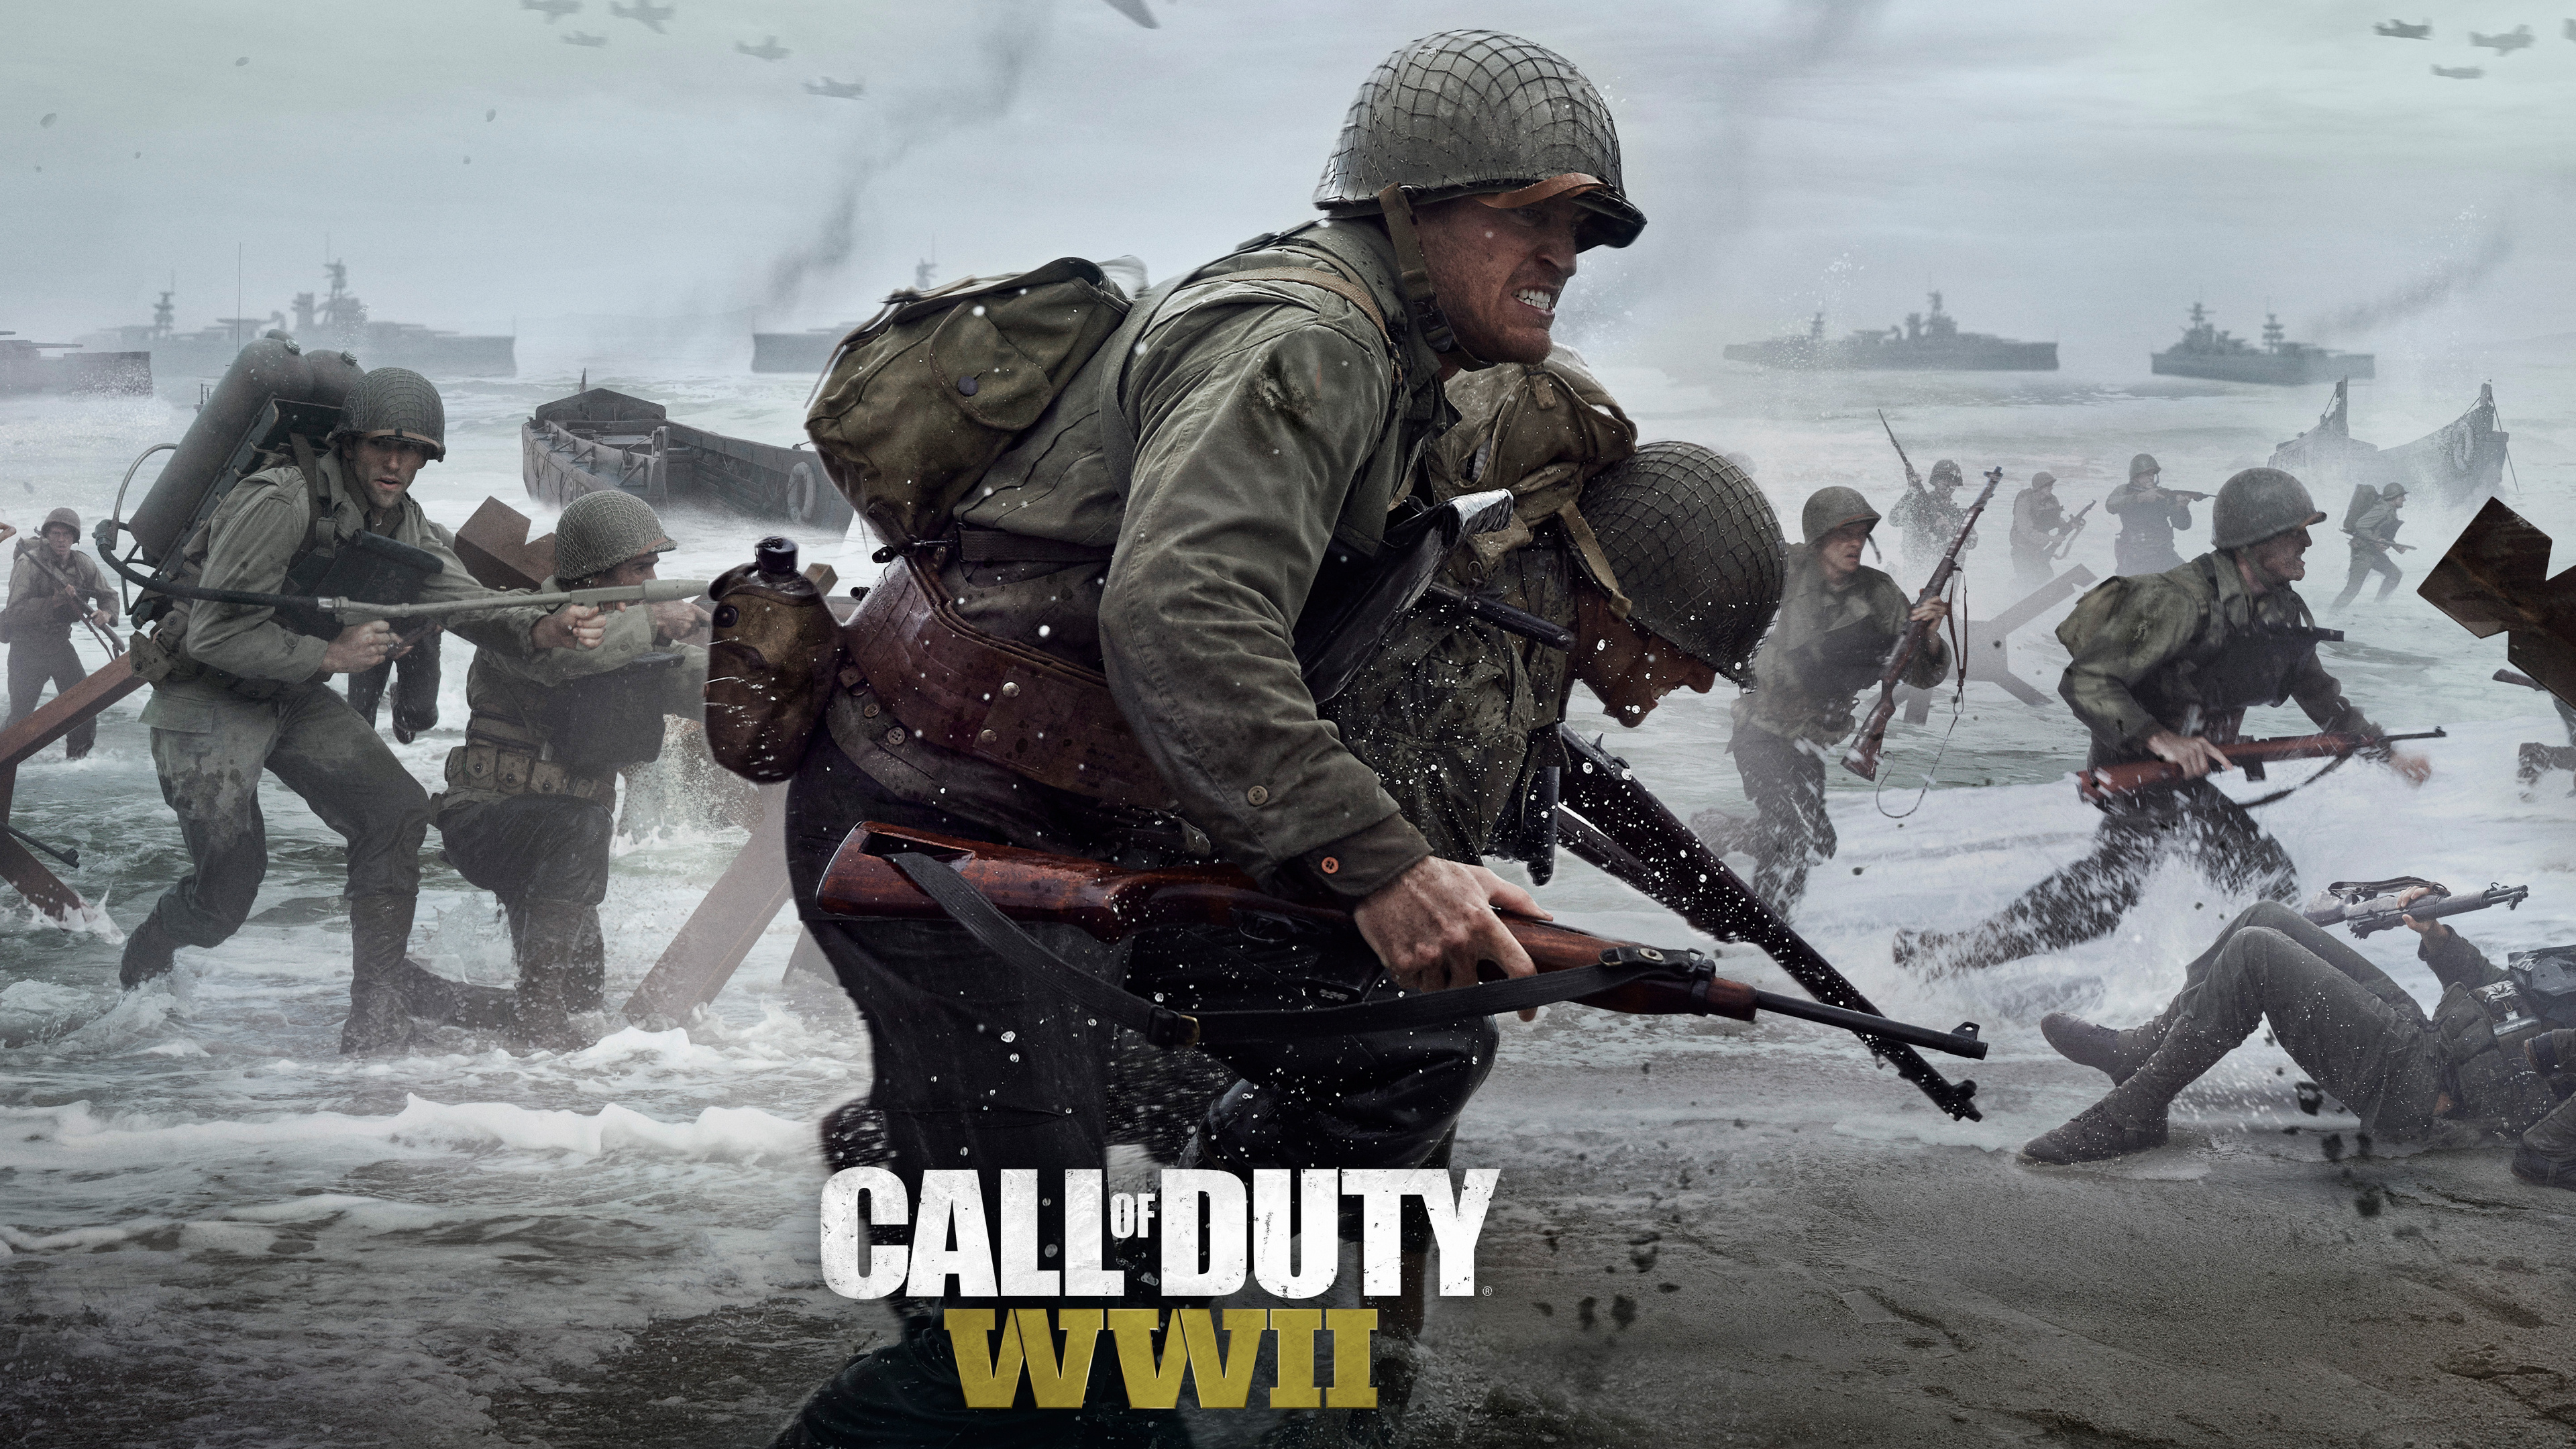 Call of Duty Ww2, Call of Duty WWII, Call of Duty, Call of Duty World at War, Activision. Wallpaper in 3840x2160 Resolution